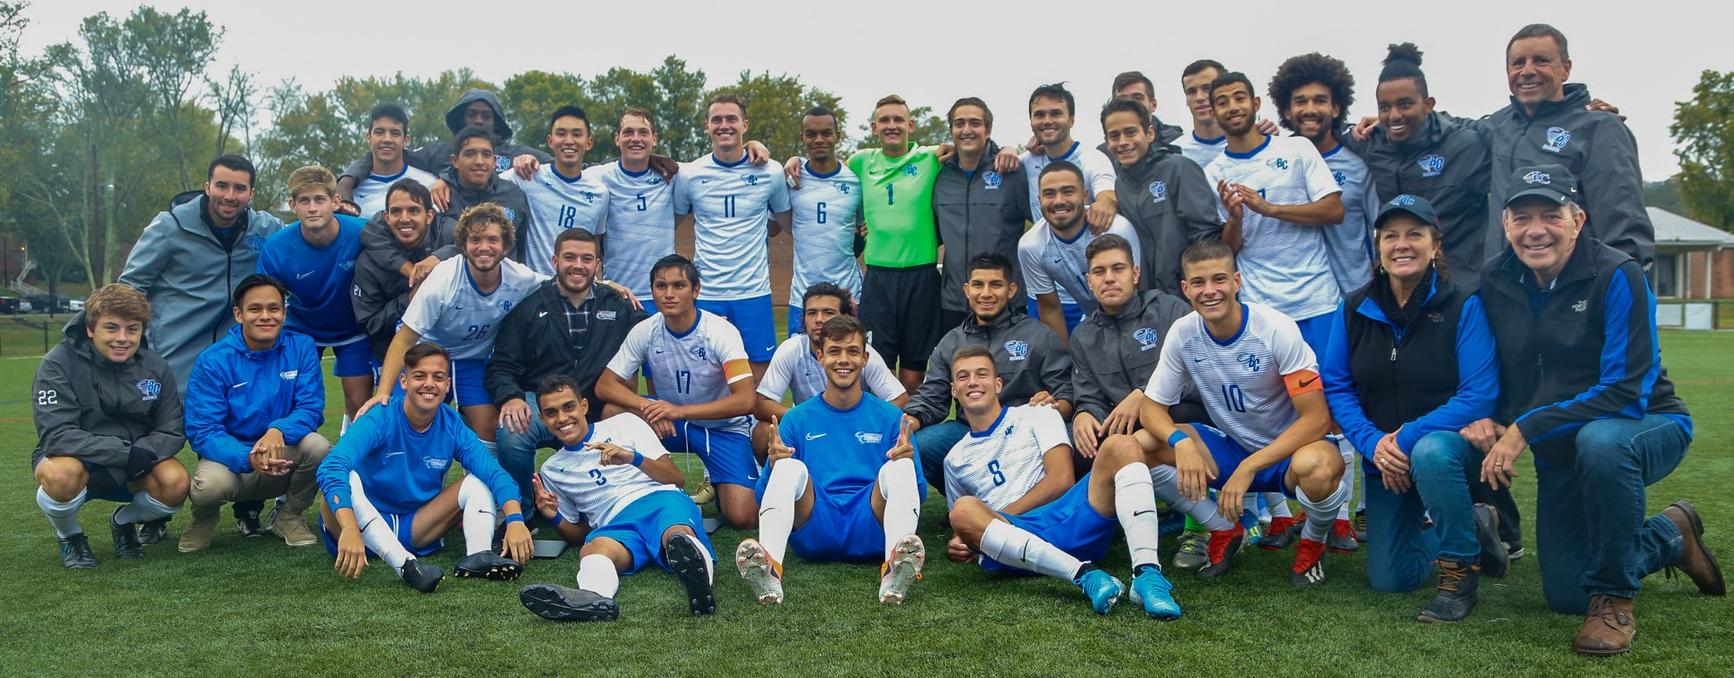 Members of the Brevard College Tornados men's soccer first team and reserve team - along with Head Coach Helio "L" D'Anna, Associate Head Coach Juan Mascaro Jr., Brevard College President David Joyce and First Lady Lynne Joyce - gather around the 10 Brevard College seniors. (Courtesy of Victoria Brayman '22).